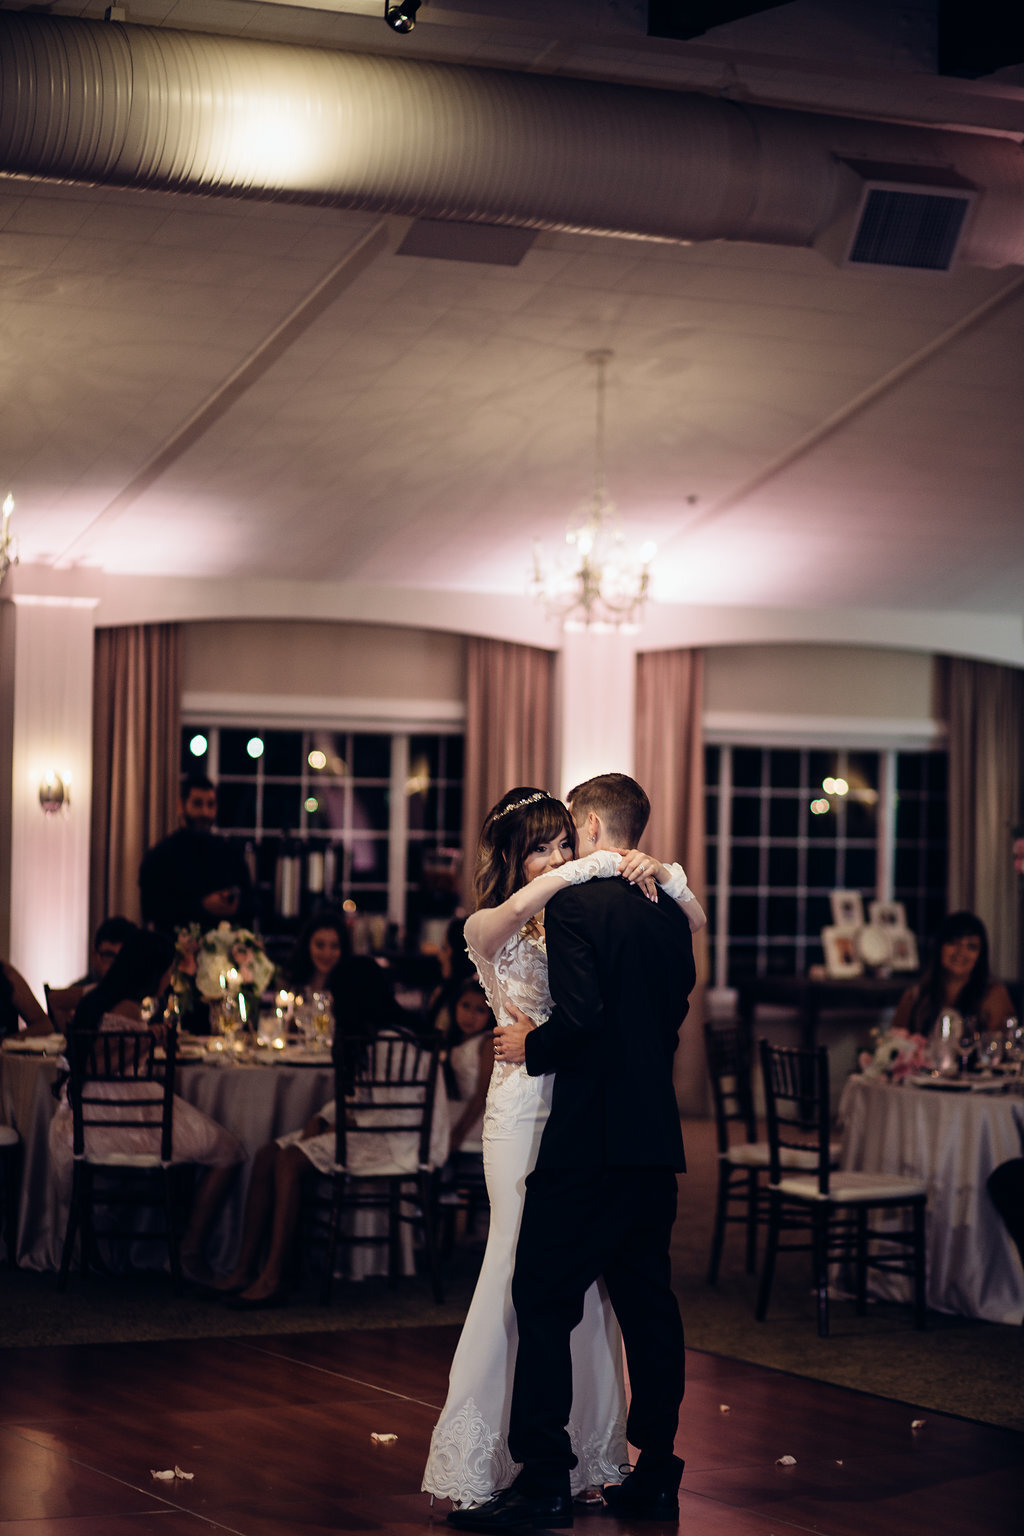 Wedding Photograph Of Bride Holding Her Groom While Dancing Los Angeles